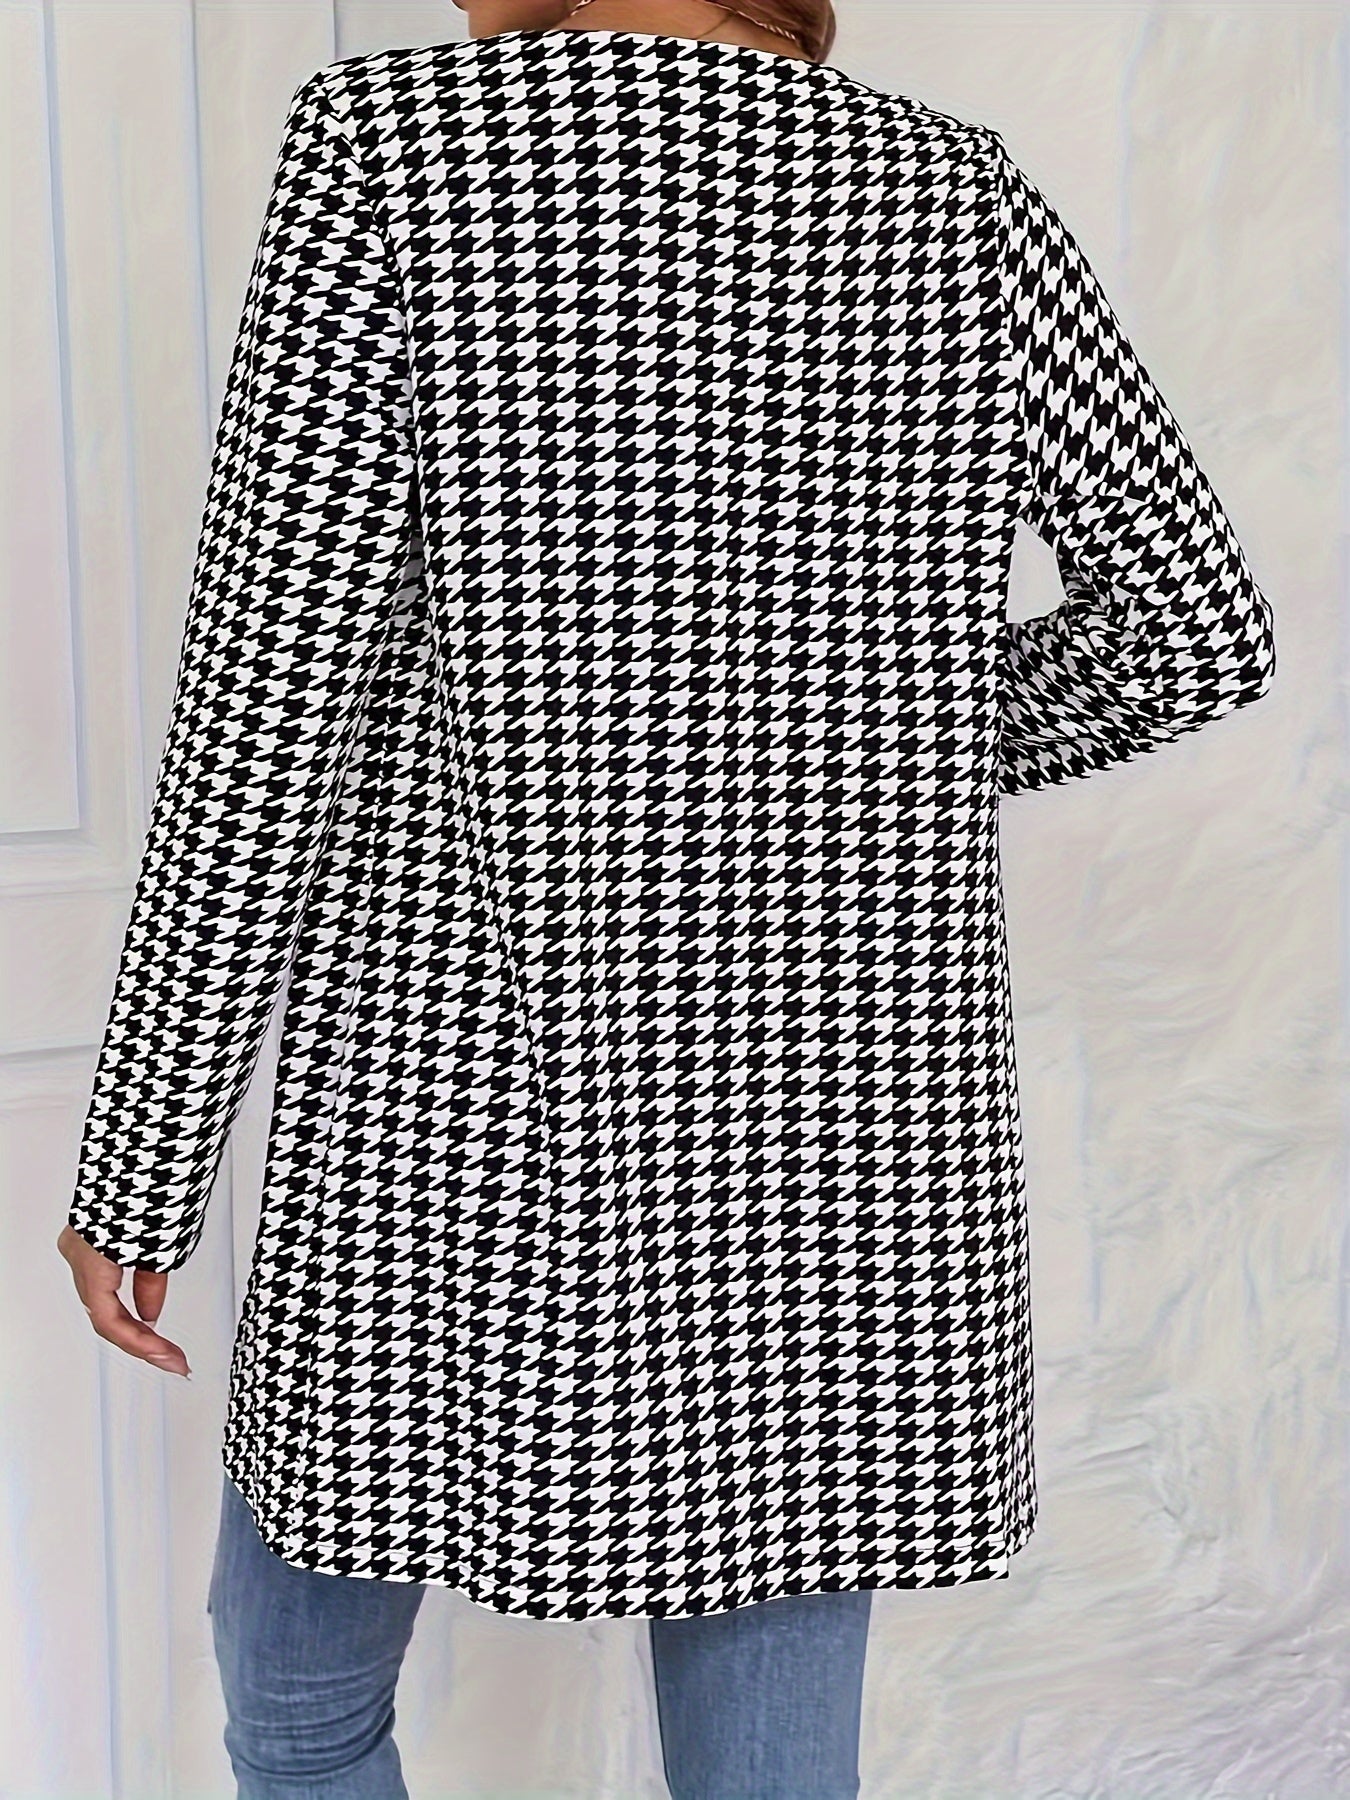 Houndstooth Print Long Sleeve Jacket, Casual Open Front Crew Neck Outerwear, Women's Clothing